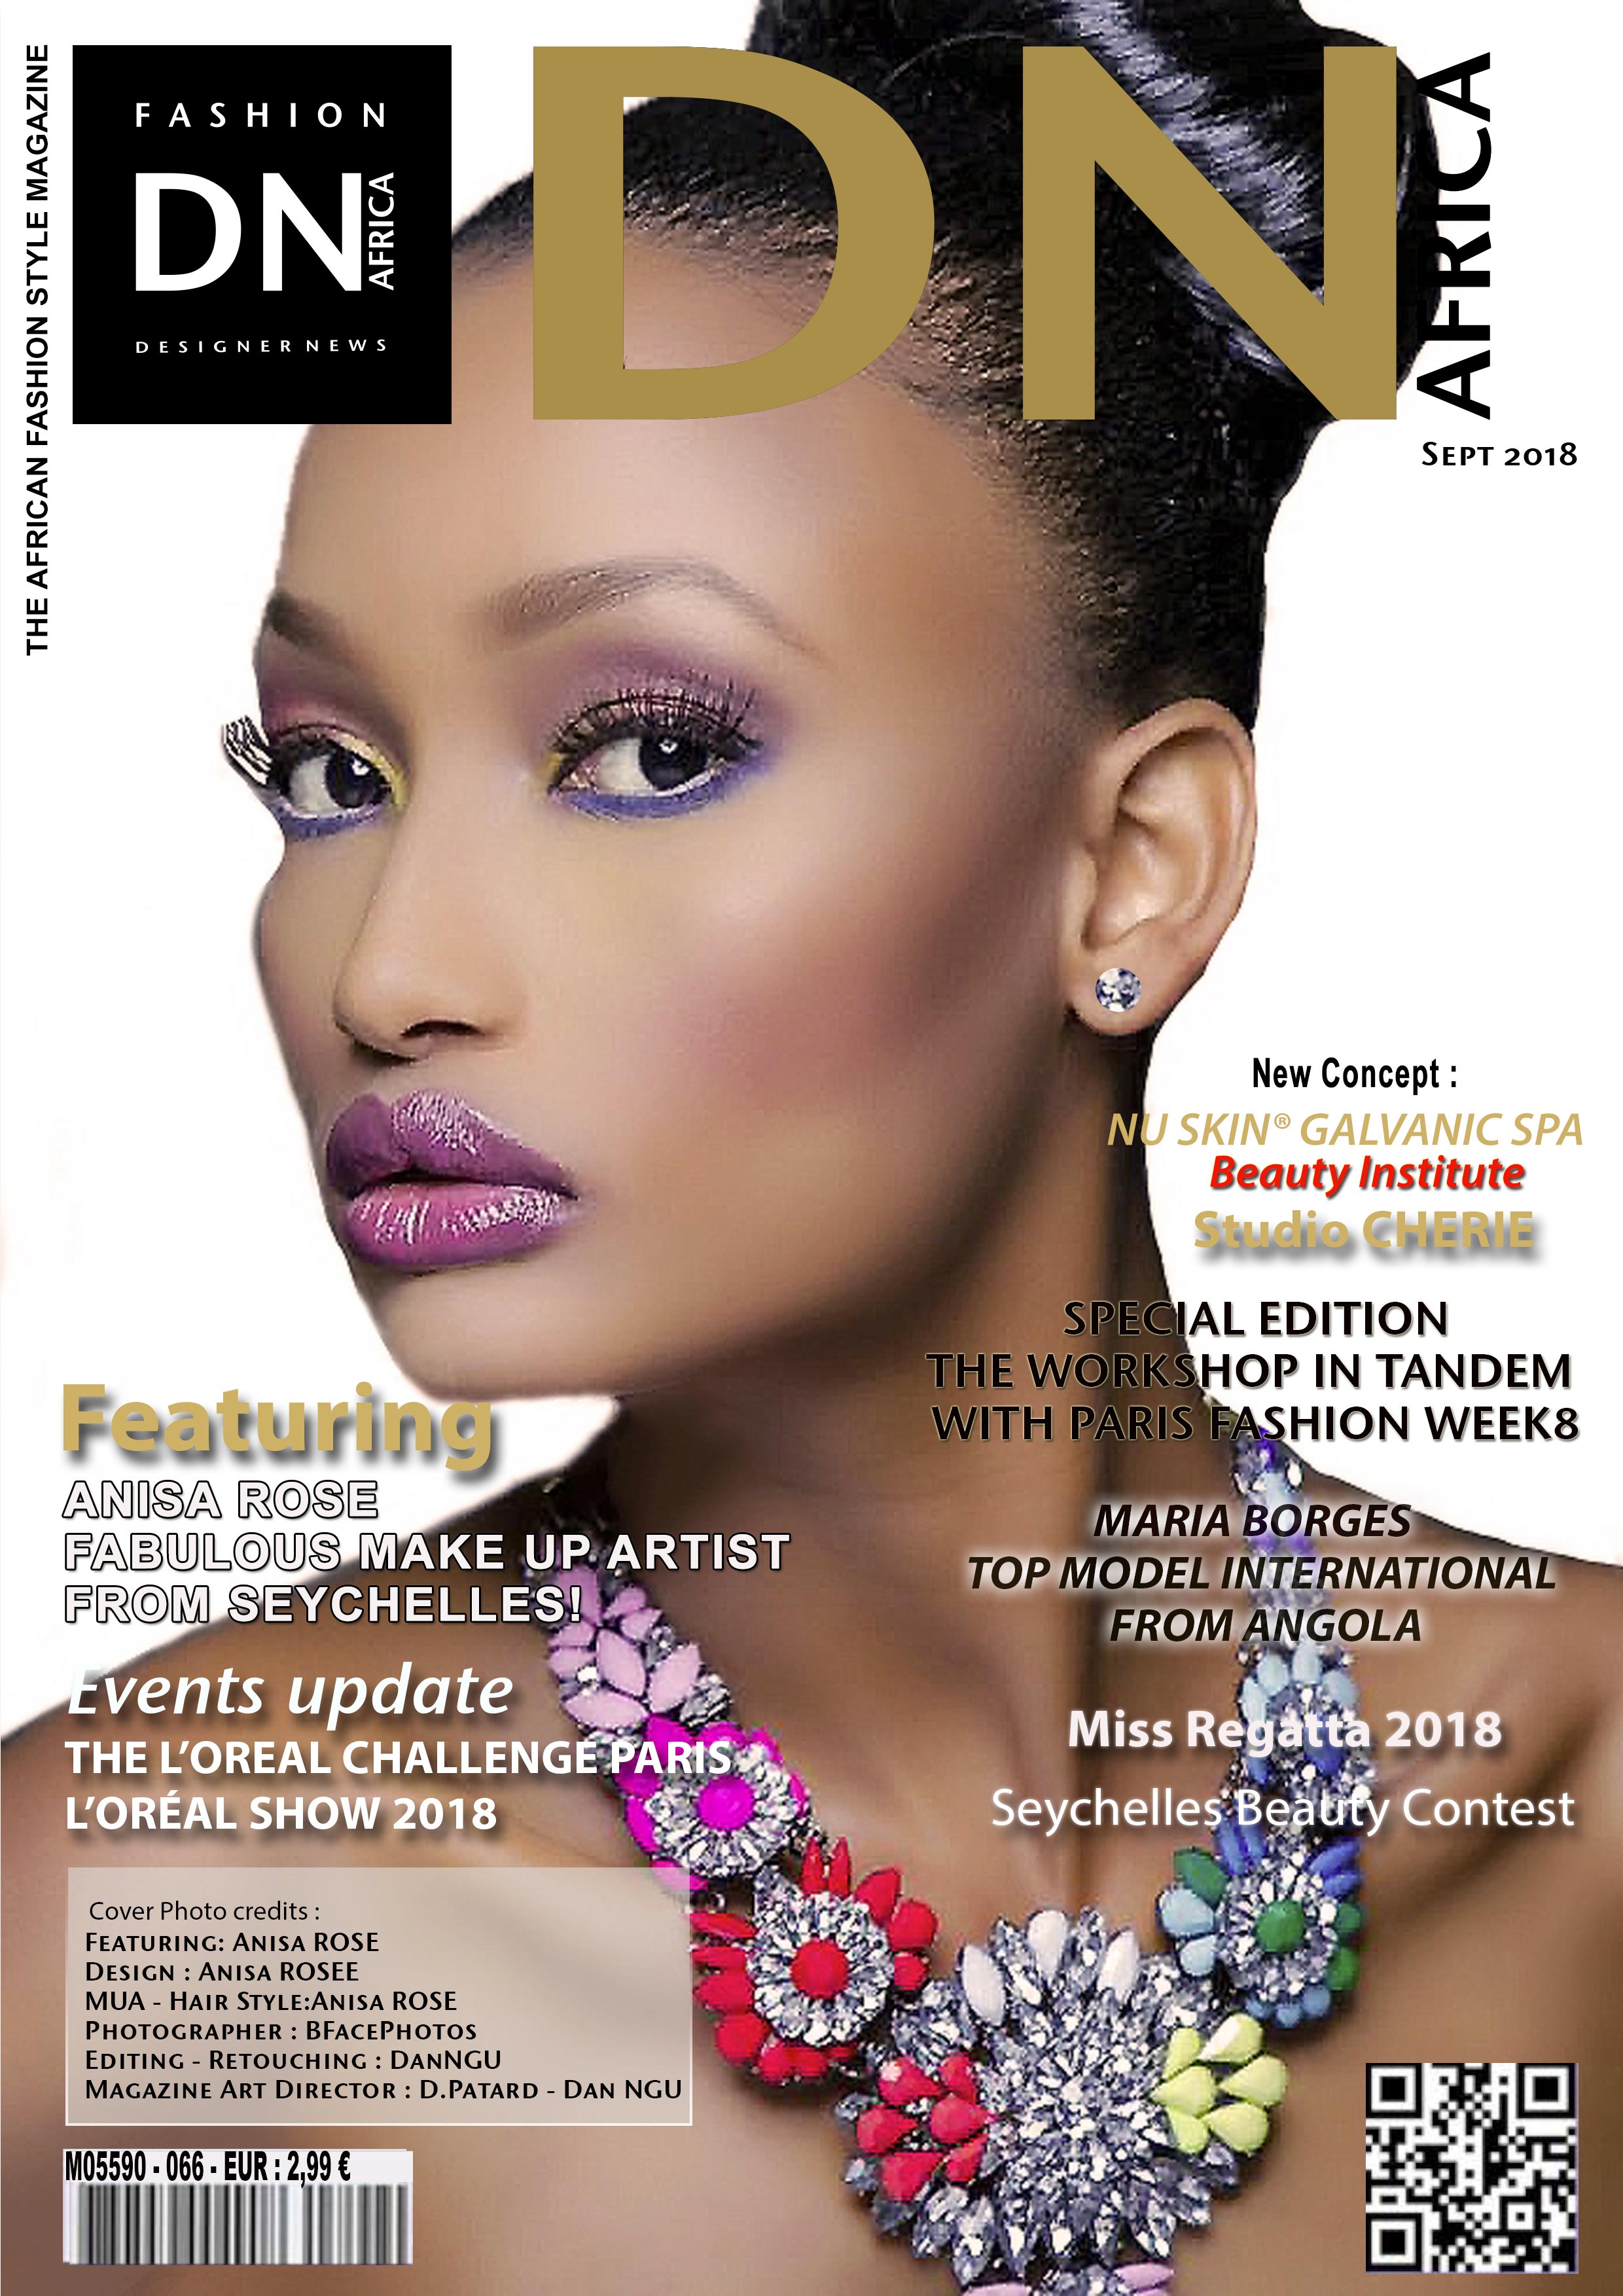 DNAFRICA-Cover-SEPT-2018-300x400-Mag-Number-66-Anisa-Rose